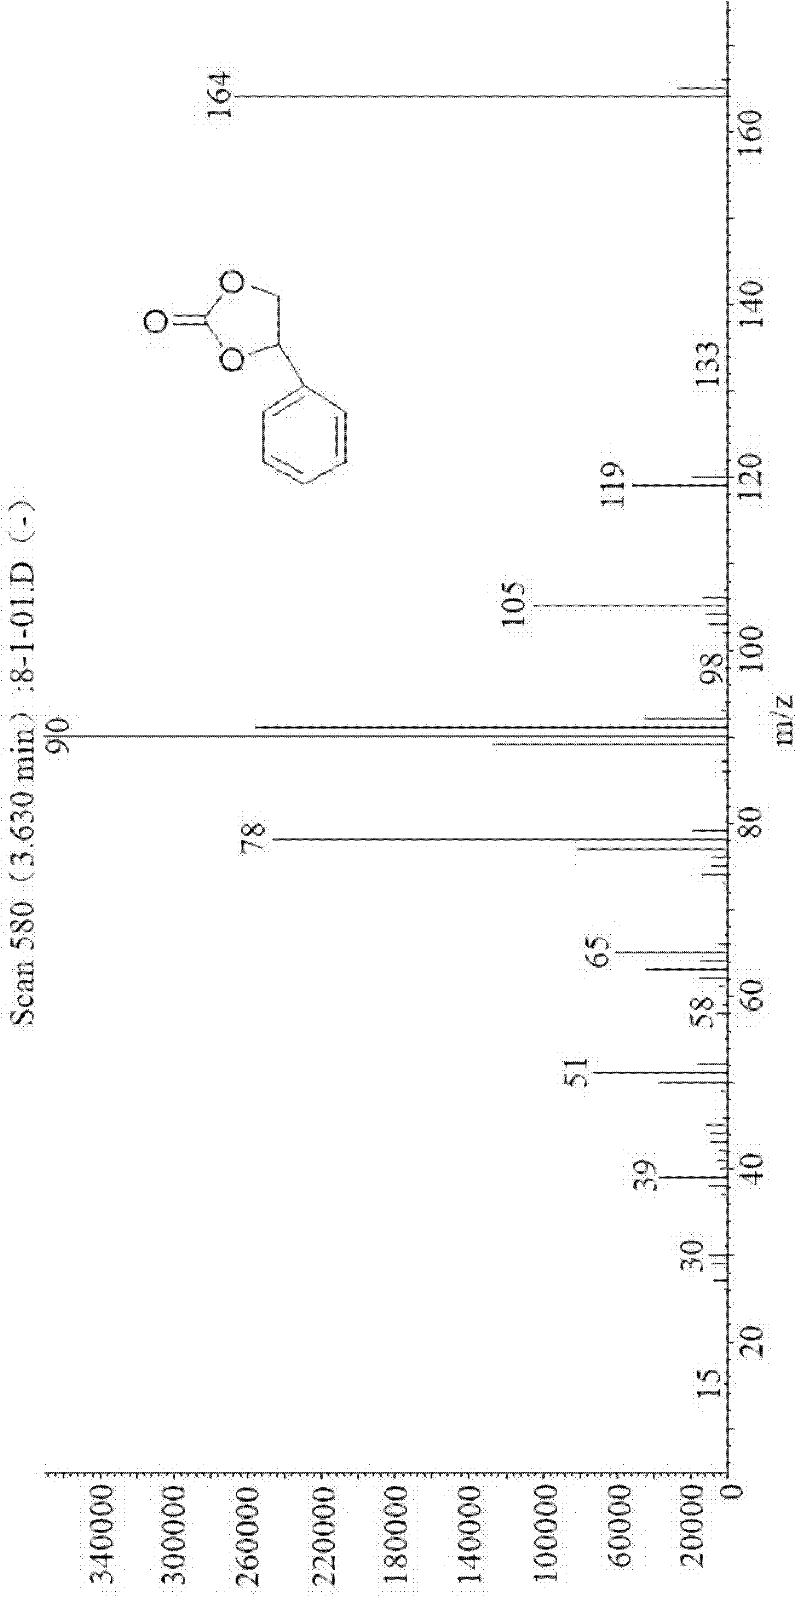 Synthesis method for cyclic carbonate under catalysis of supported Bronsted acidic ionic liquid catalyst